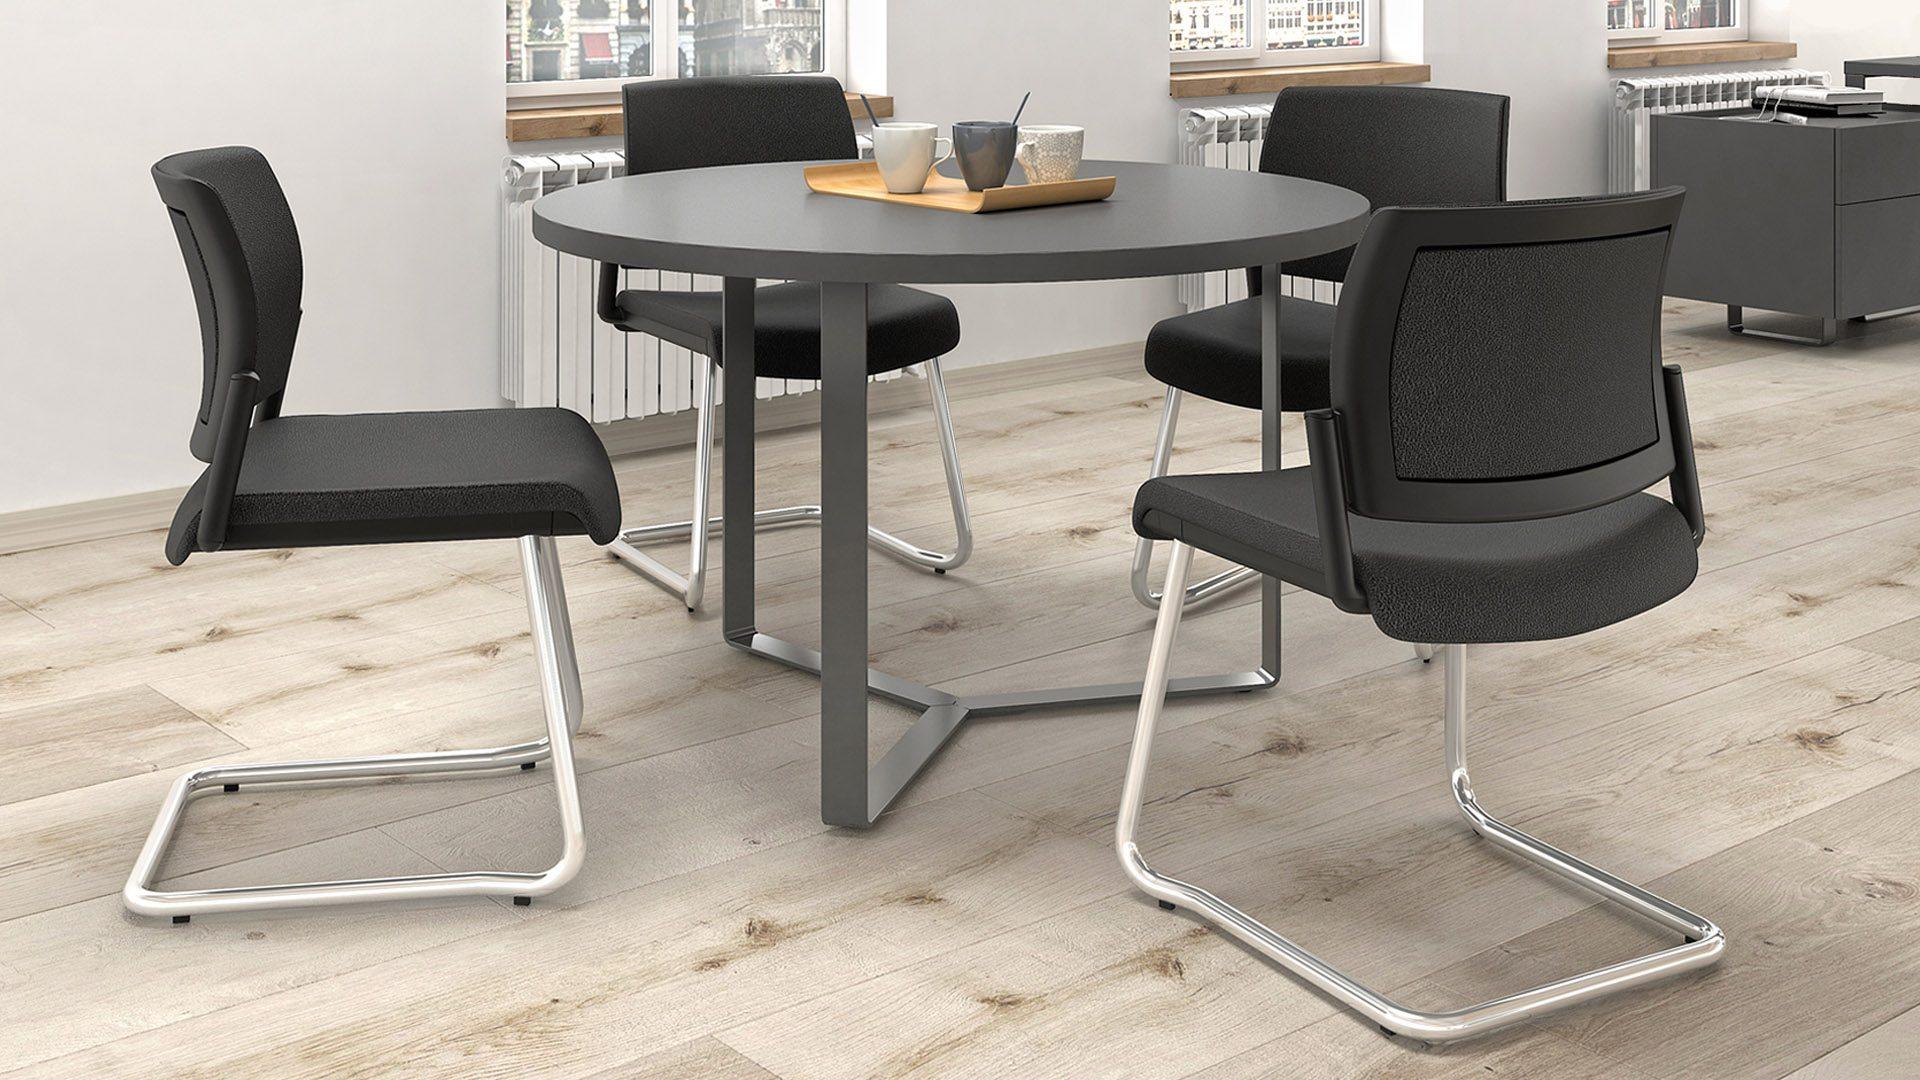 Plana round meeting table is ideal for informal breakout spaces